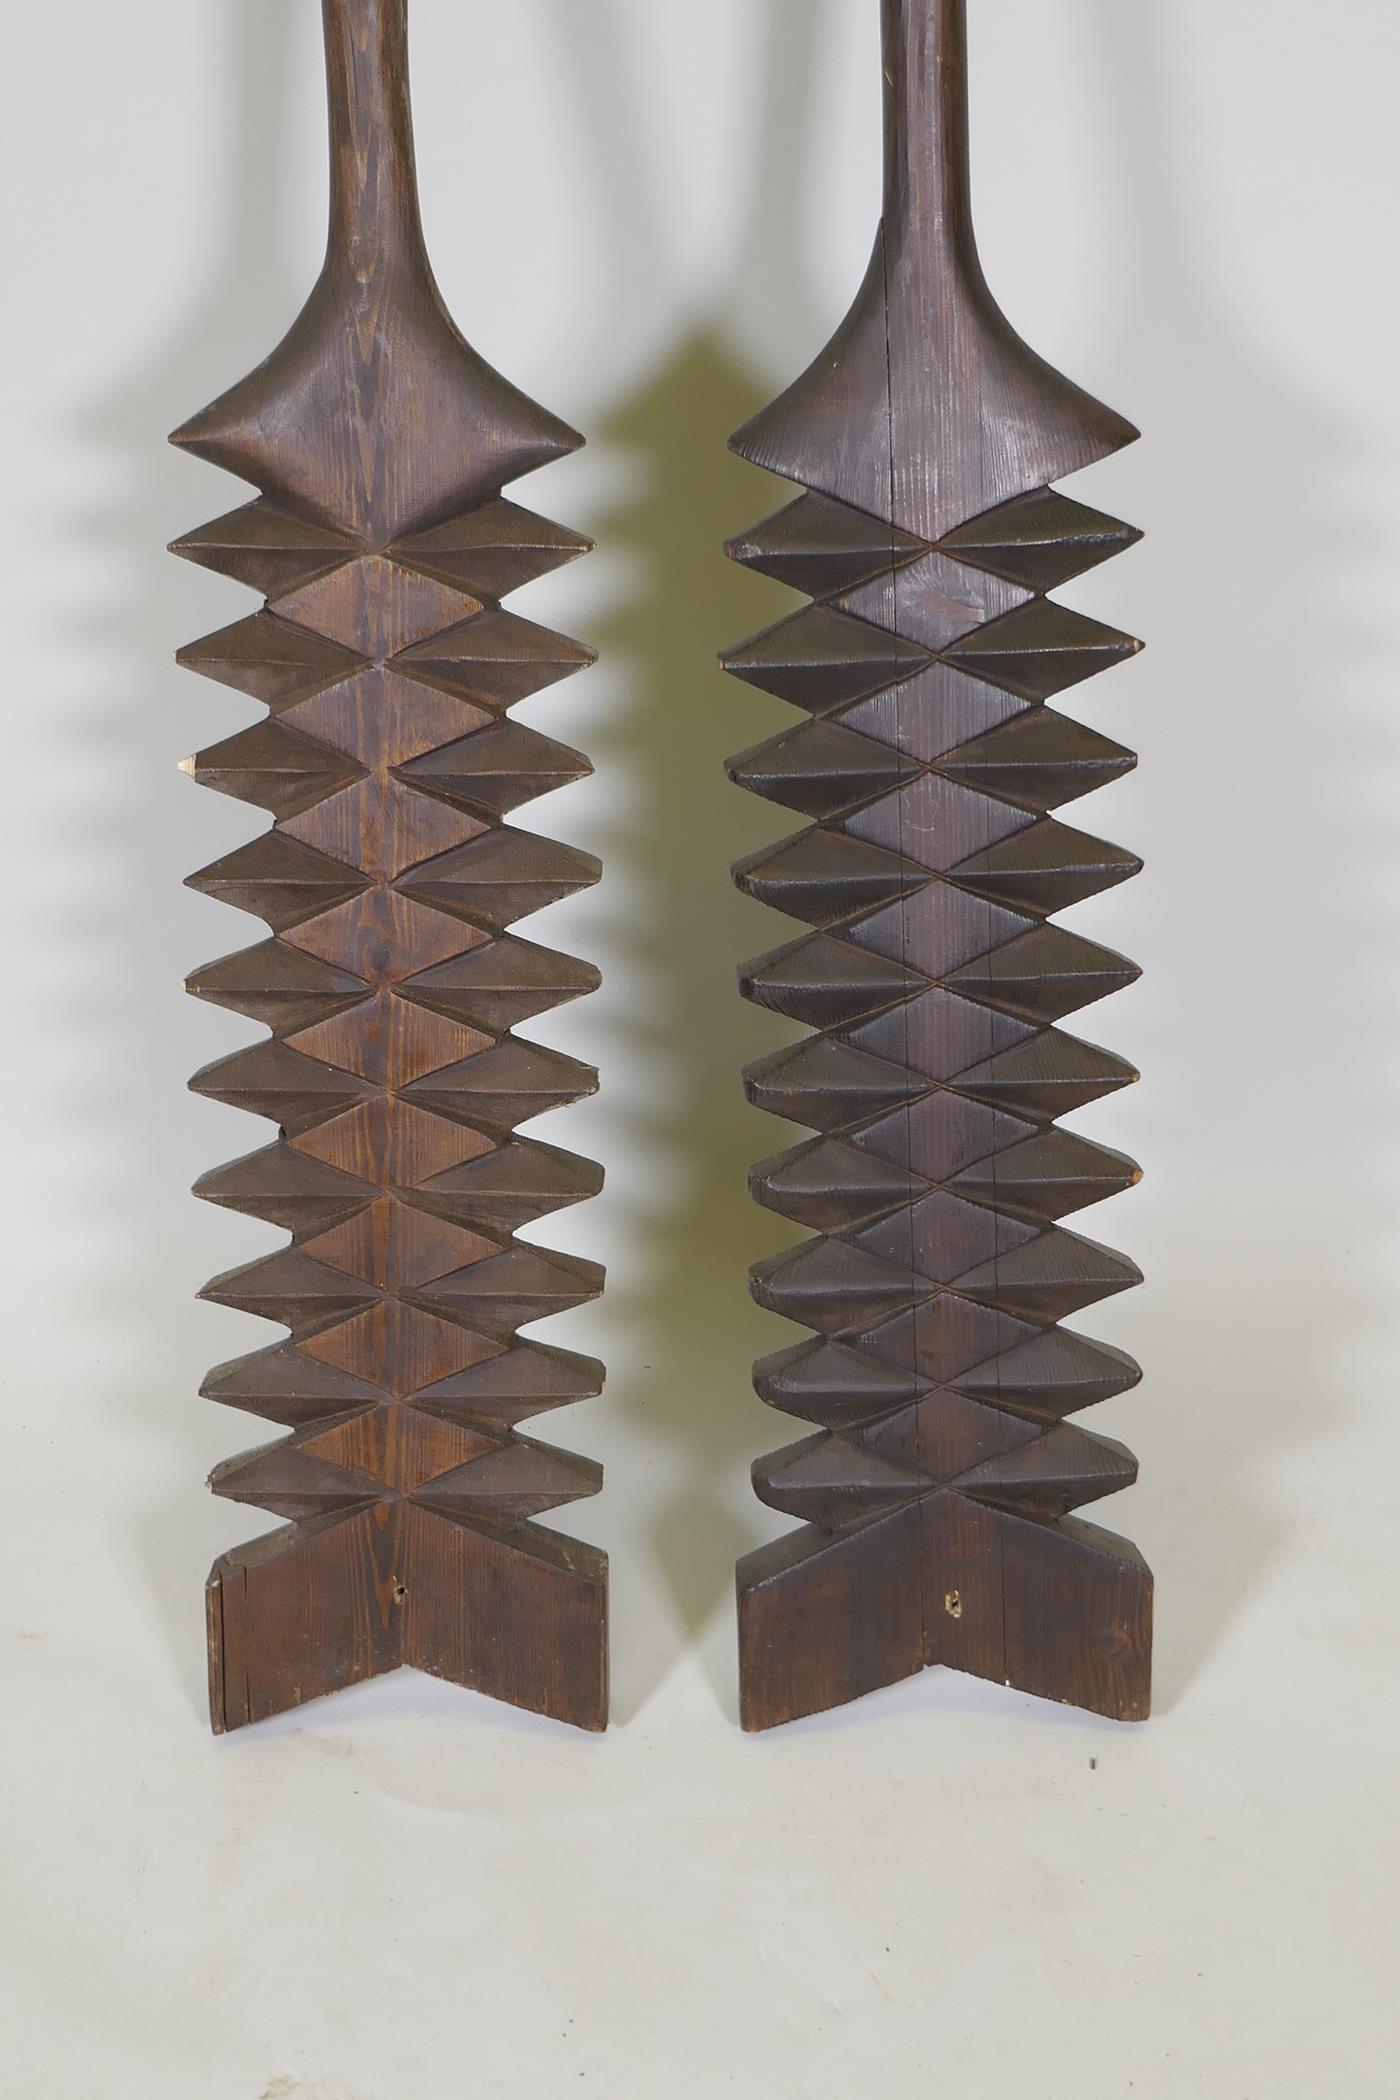 A pair of Samoan carved wood tribal paddles, 55" long - Image 3 of 4